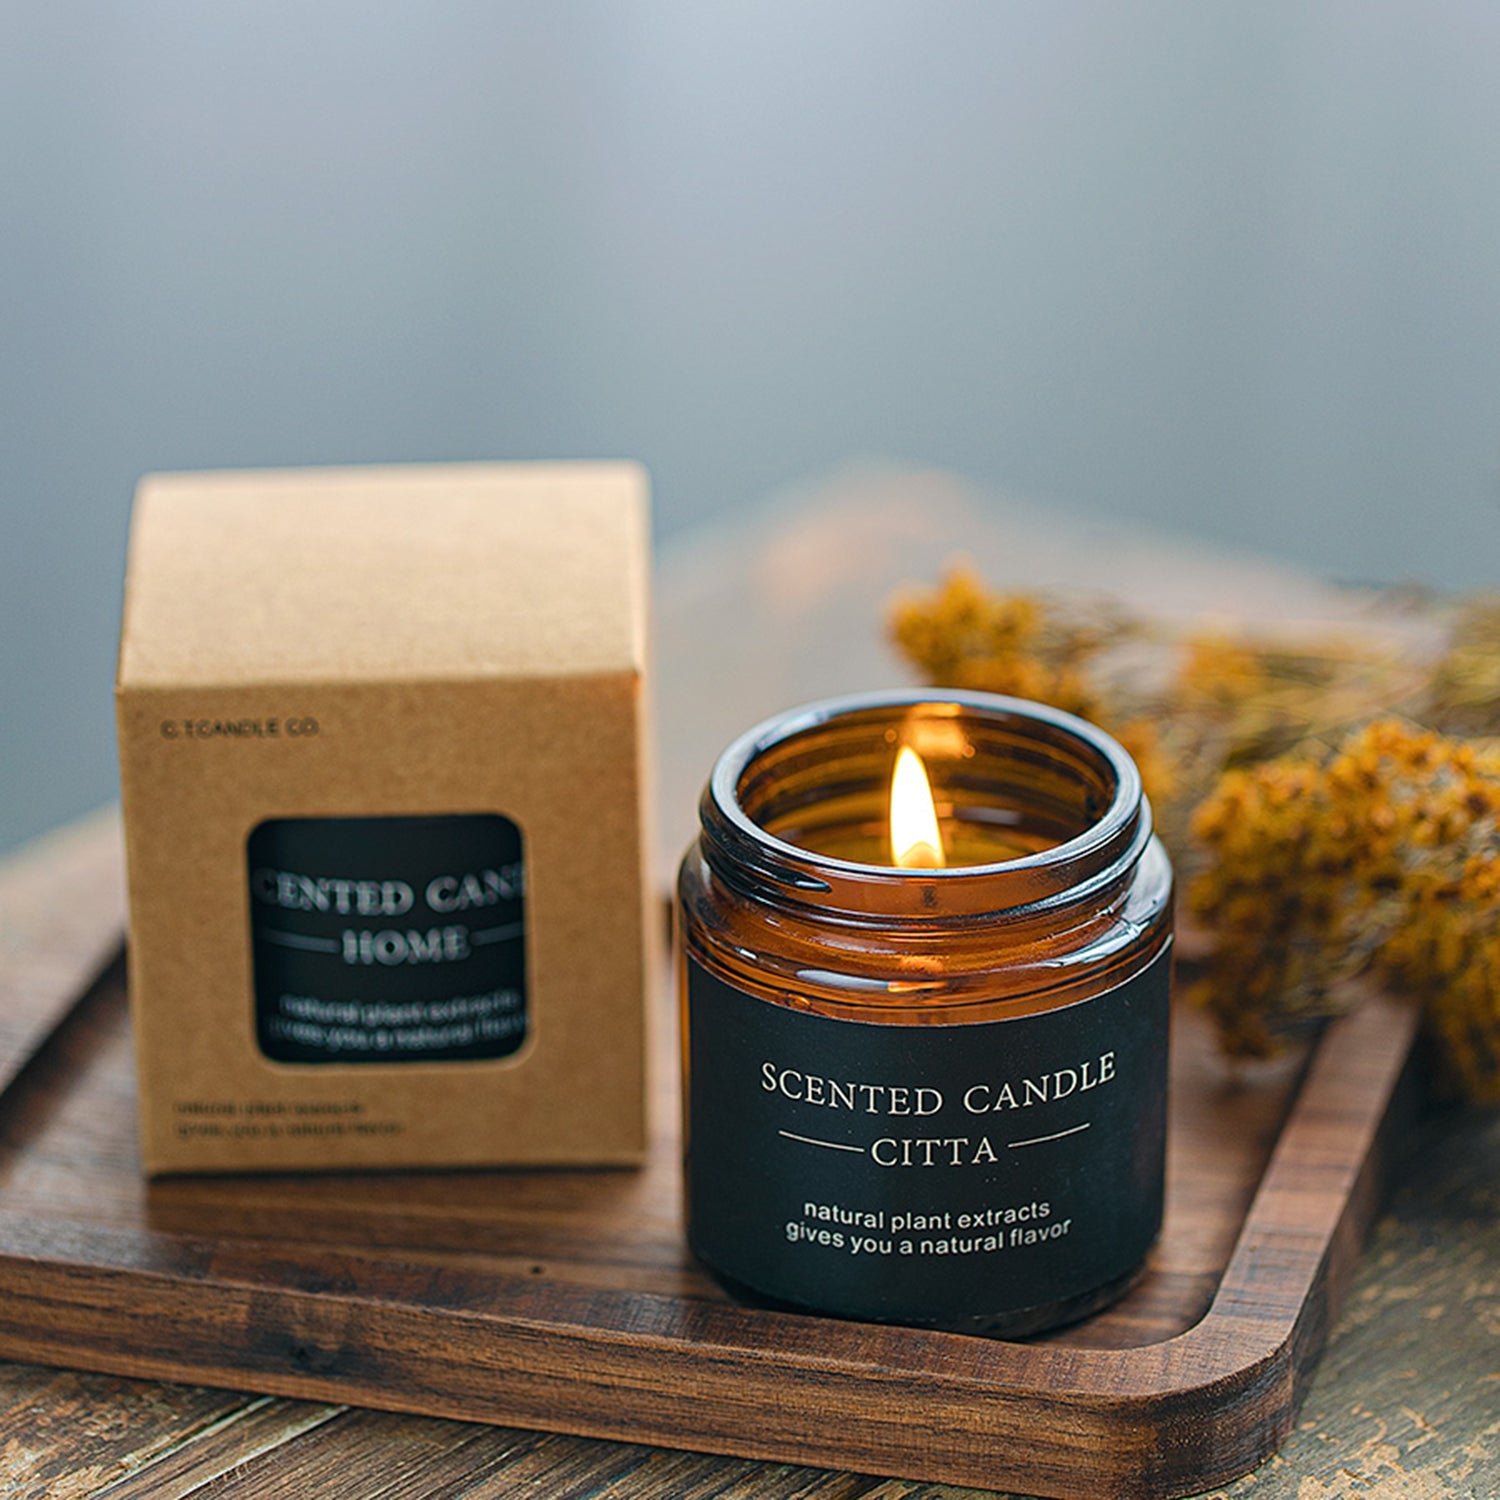 CITTA Scented Candle Aromantic Natural Soy Wax 90G Home Fragrance Aromatherapy Brown Bottle Scented Candle CITTA 